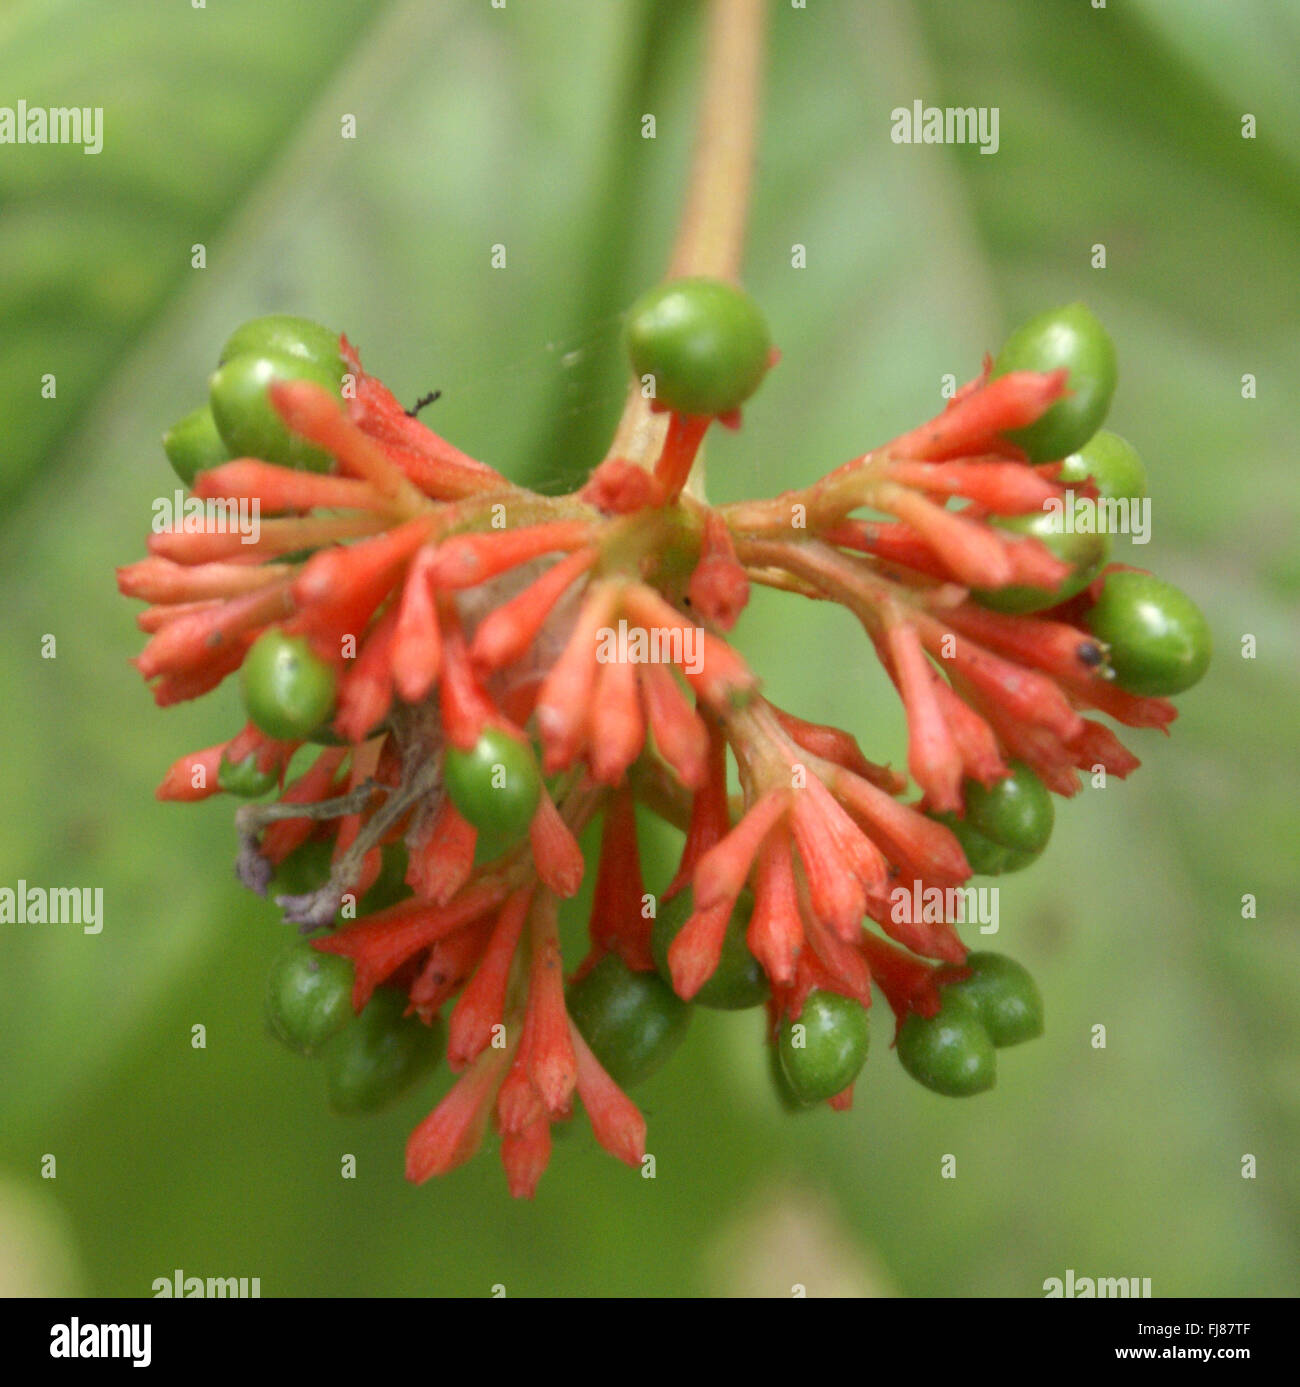 Rauvolfia serpentina,  Indian snakeroot, Sarpagandha, small shrub with elliptic leaves in whorls of 3-6, important in medicine Stock Photo